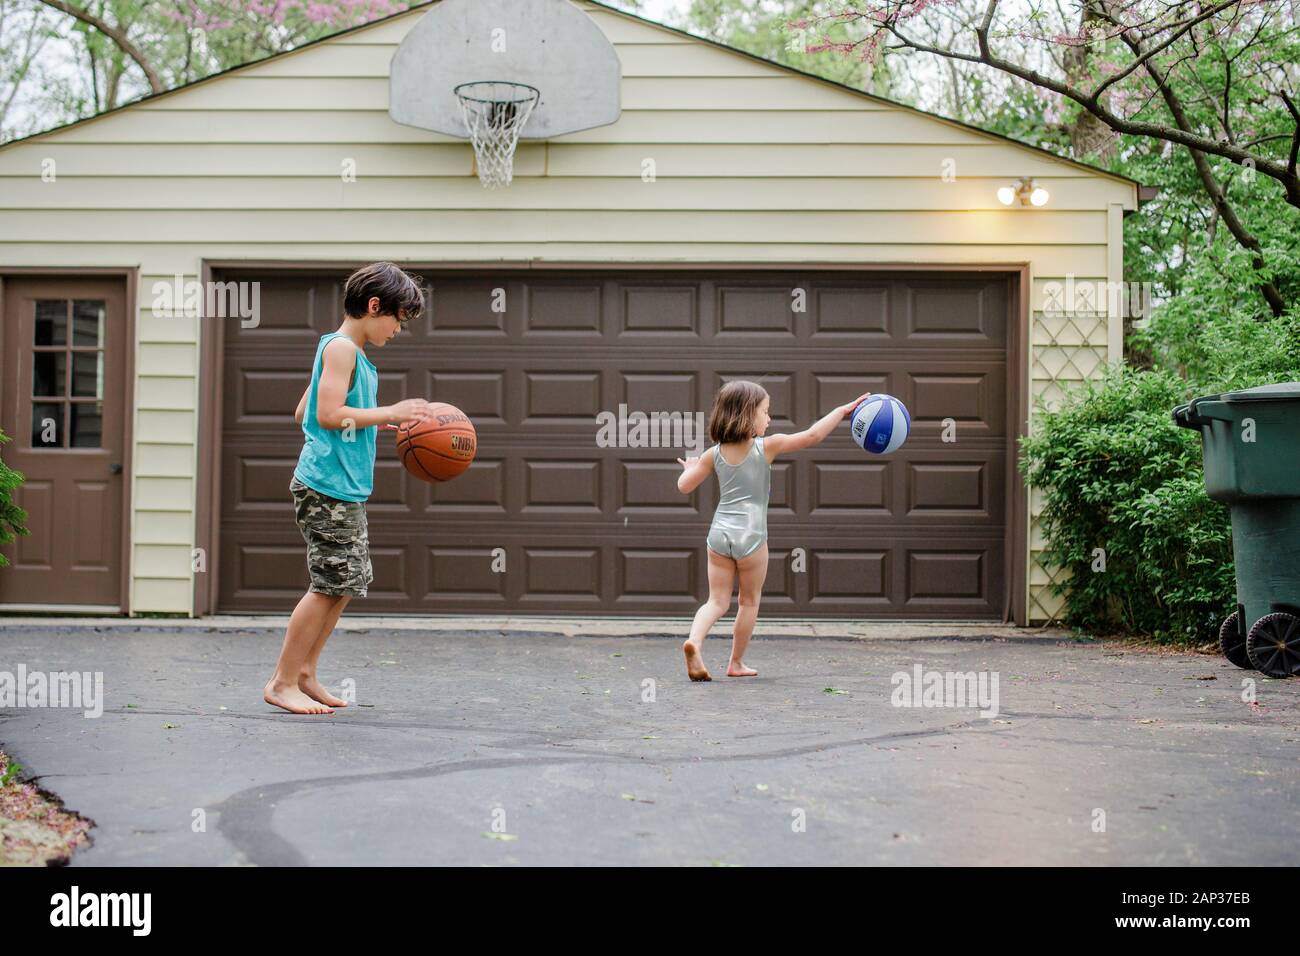 two little barefoot children dribble basketballs in a driveway Stock Photo